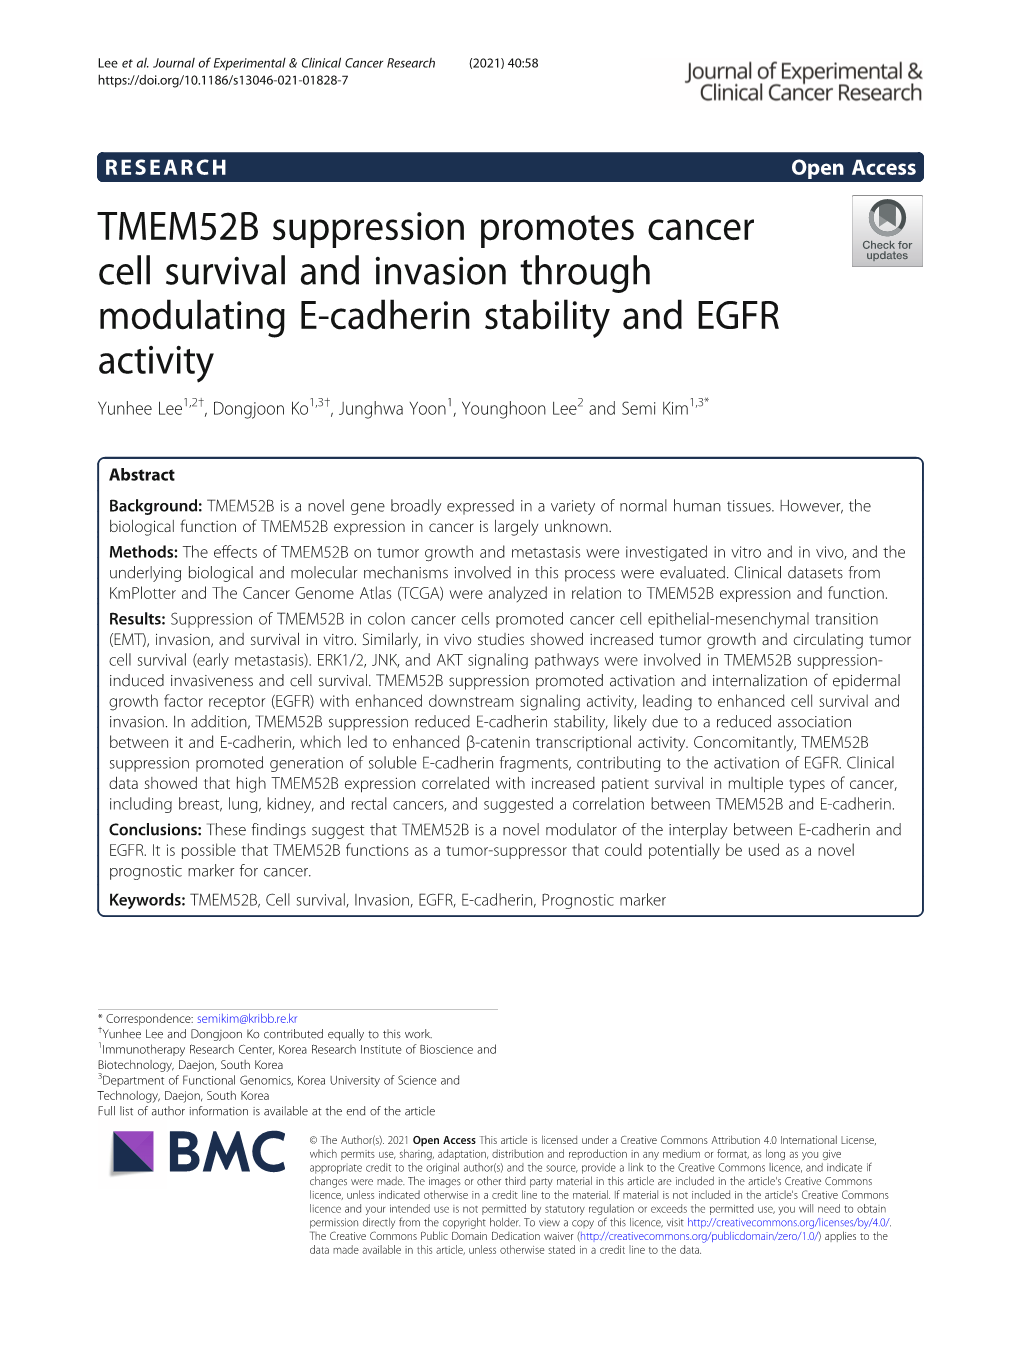 TMEM52B Suppression Promotes Cancer Cell Survival and Invasion